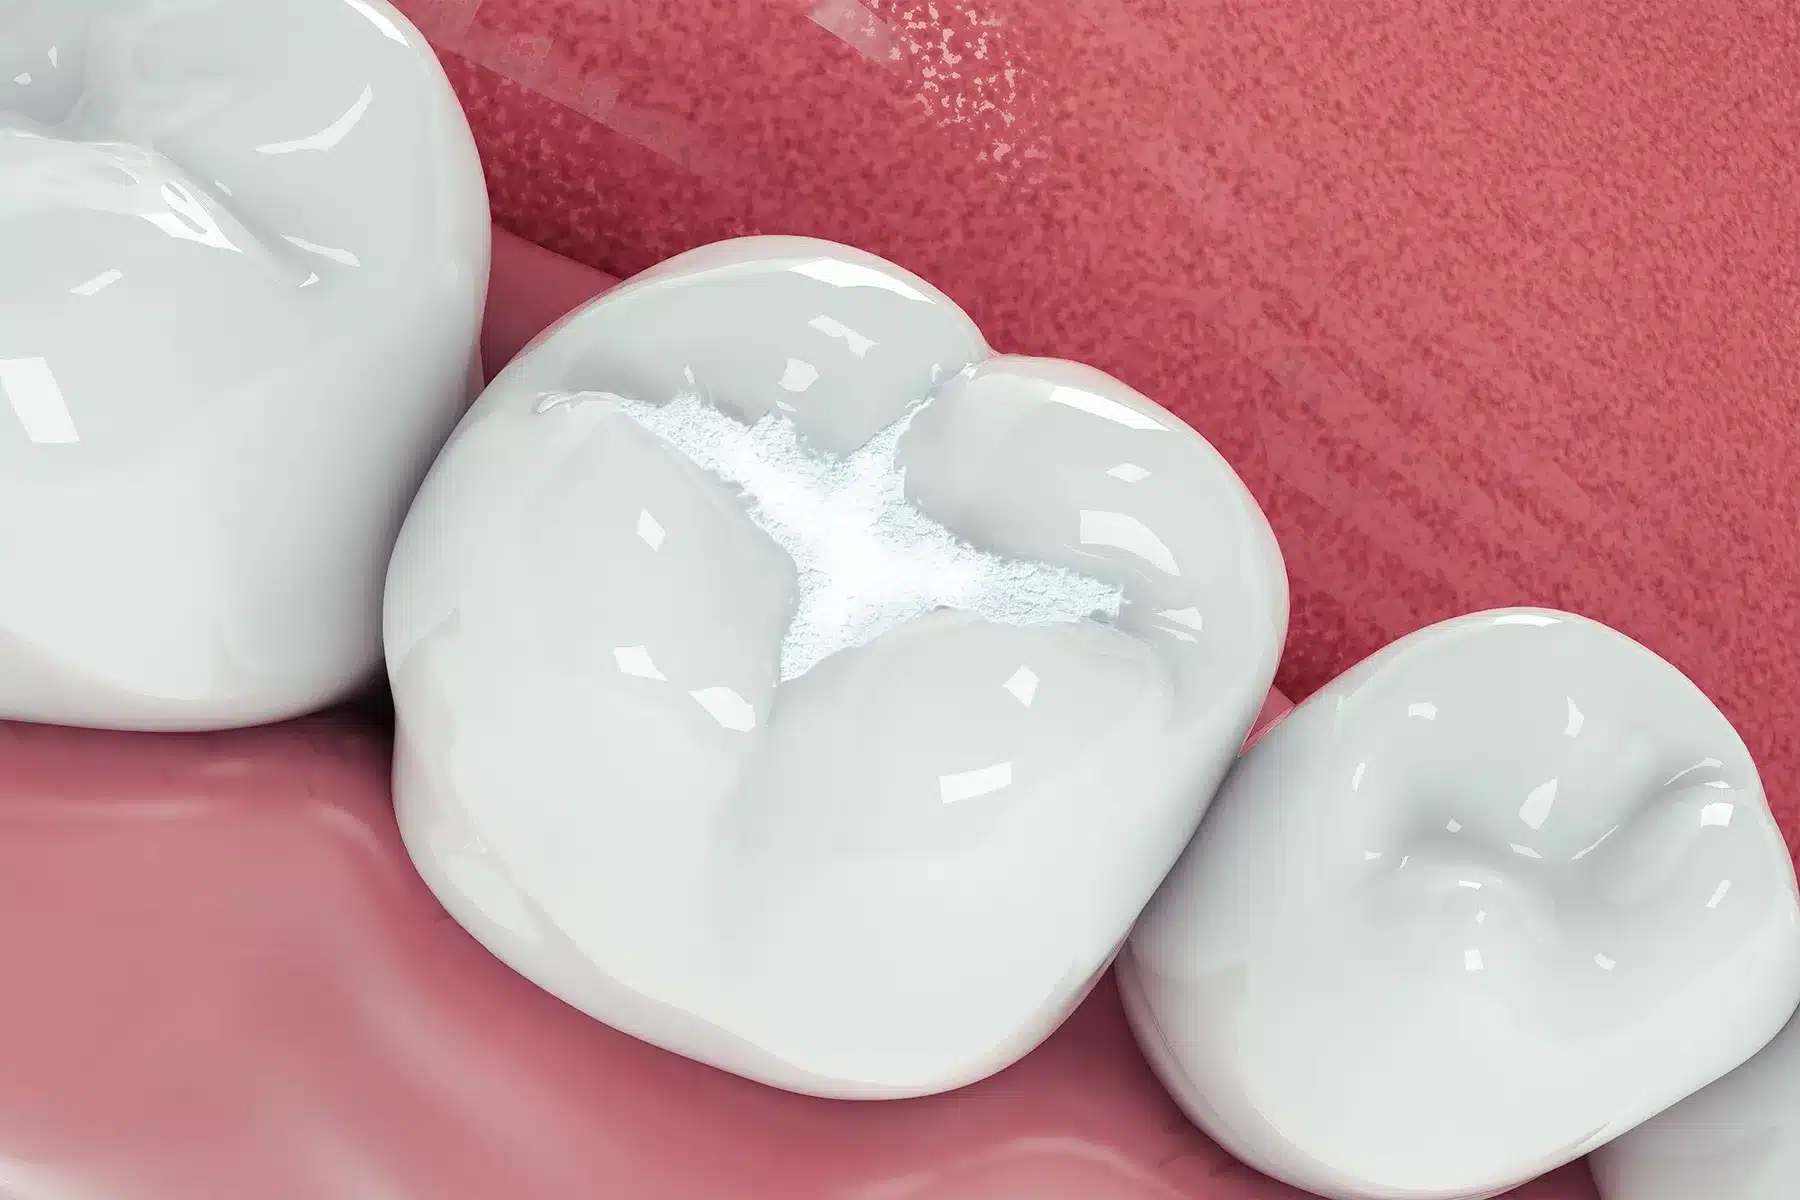 Should you replace your silver fillings with white fillings?